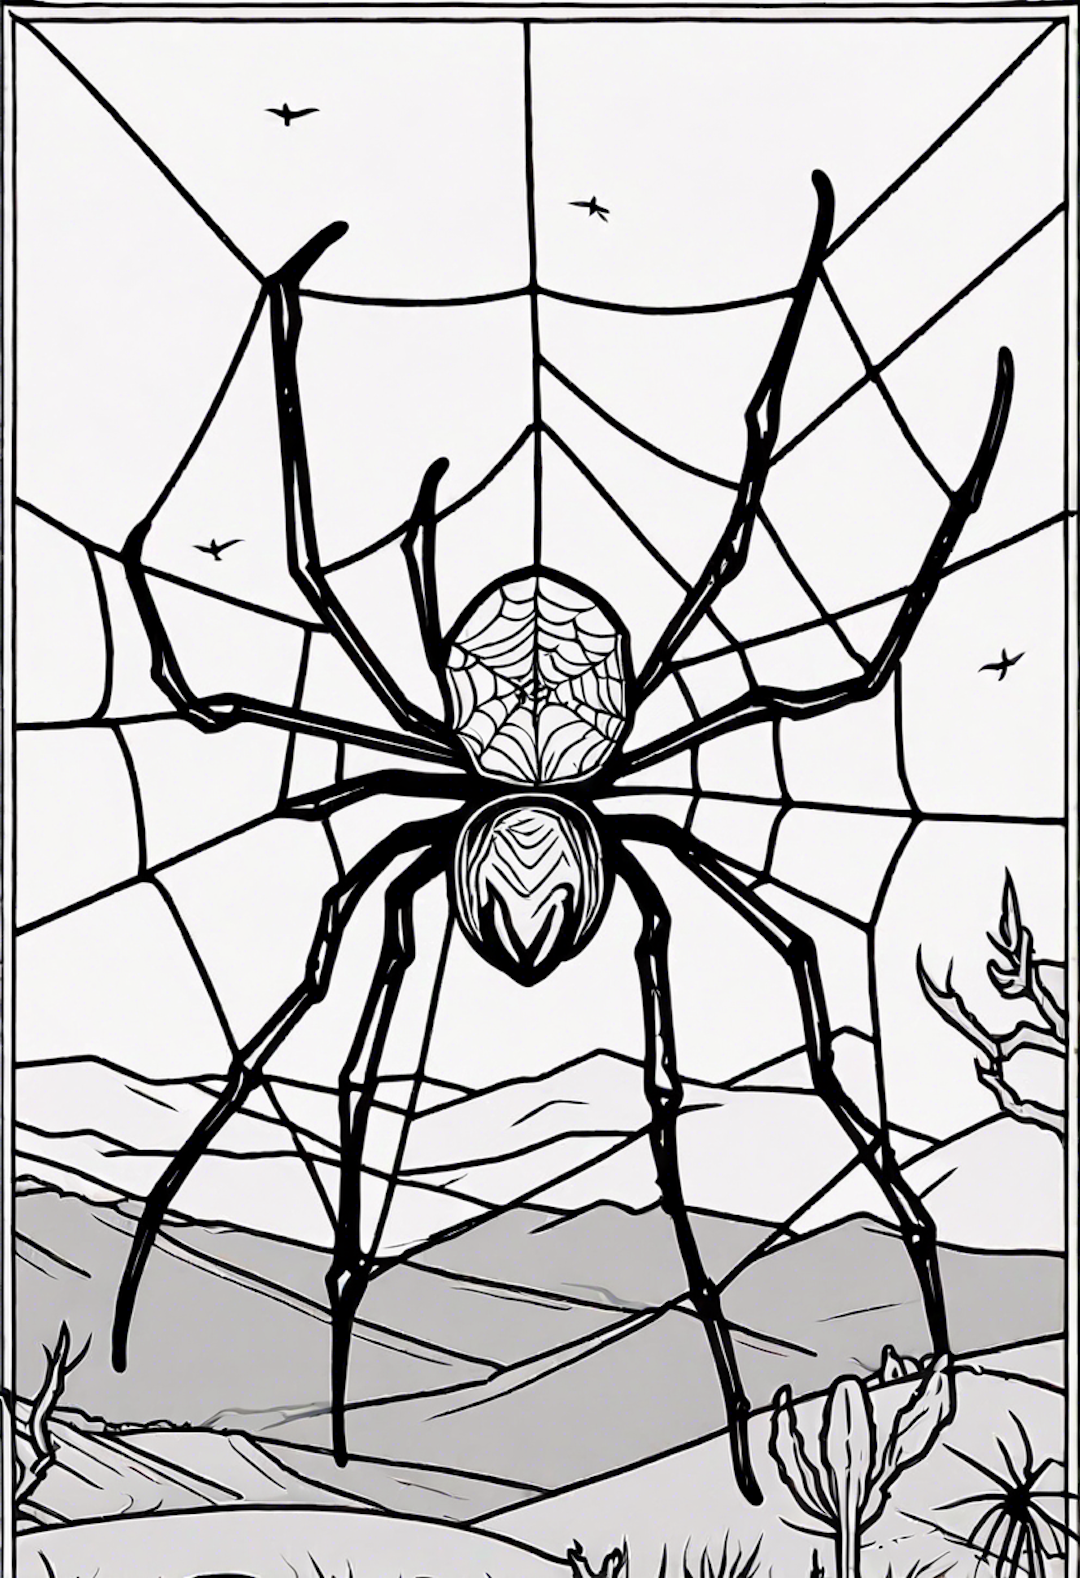 A Spider On A Web At A Desert